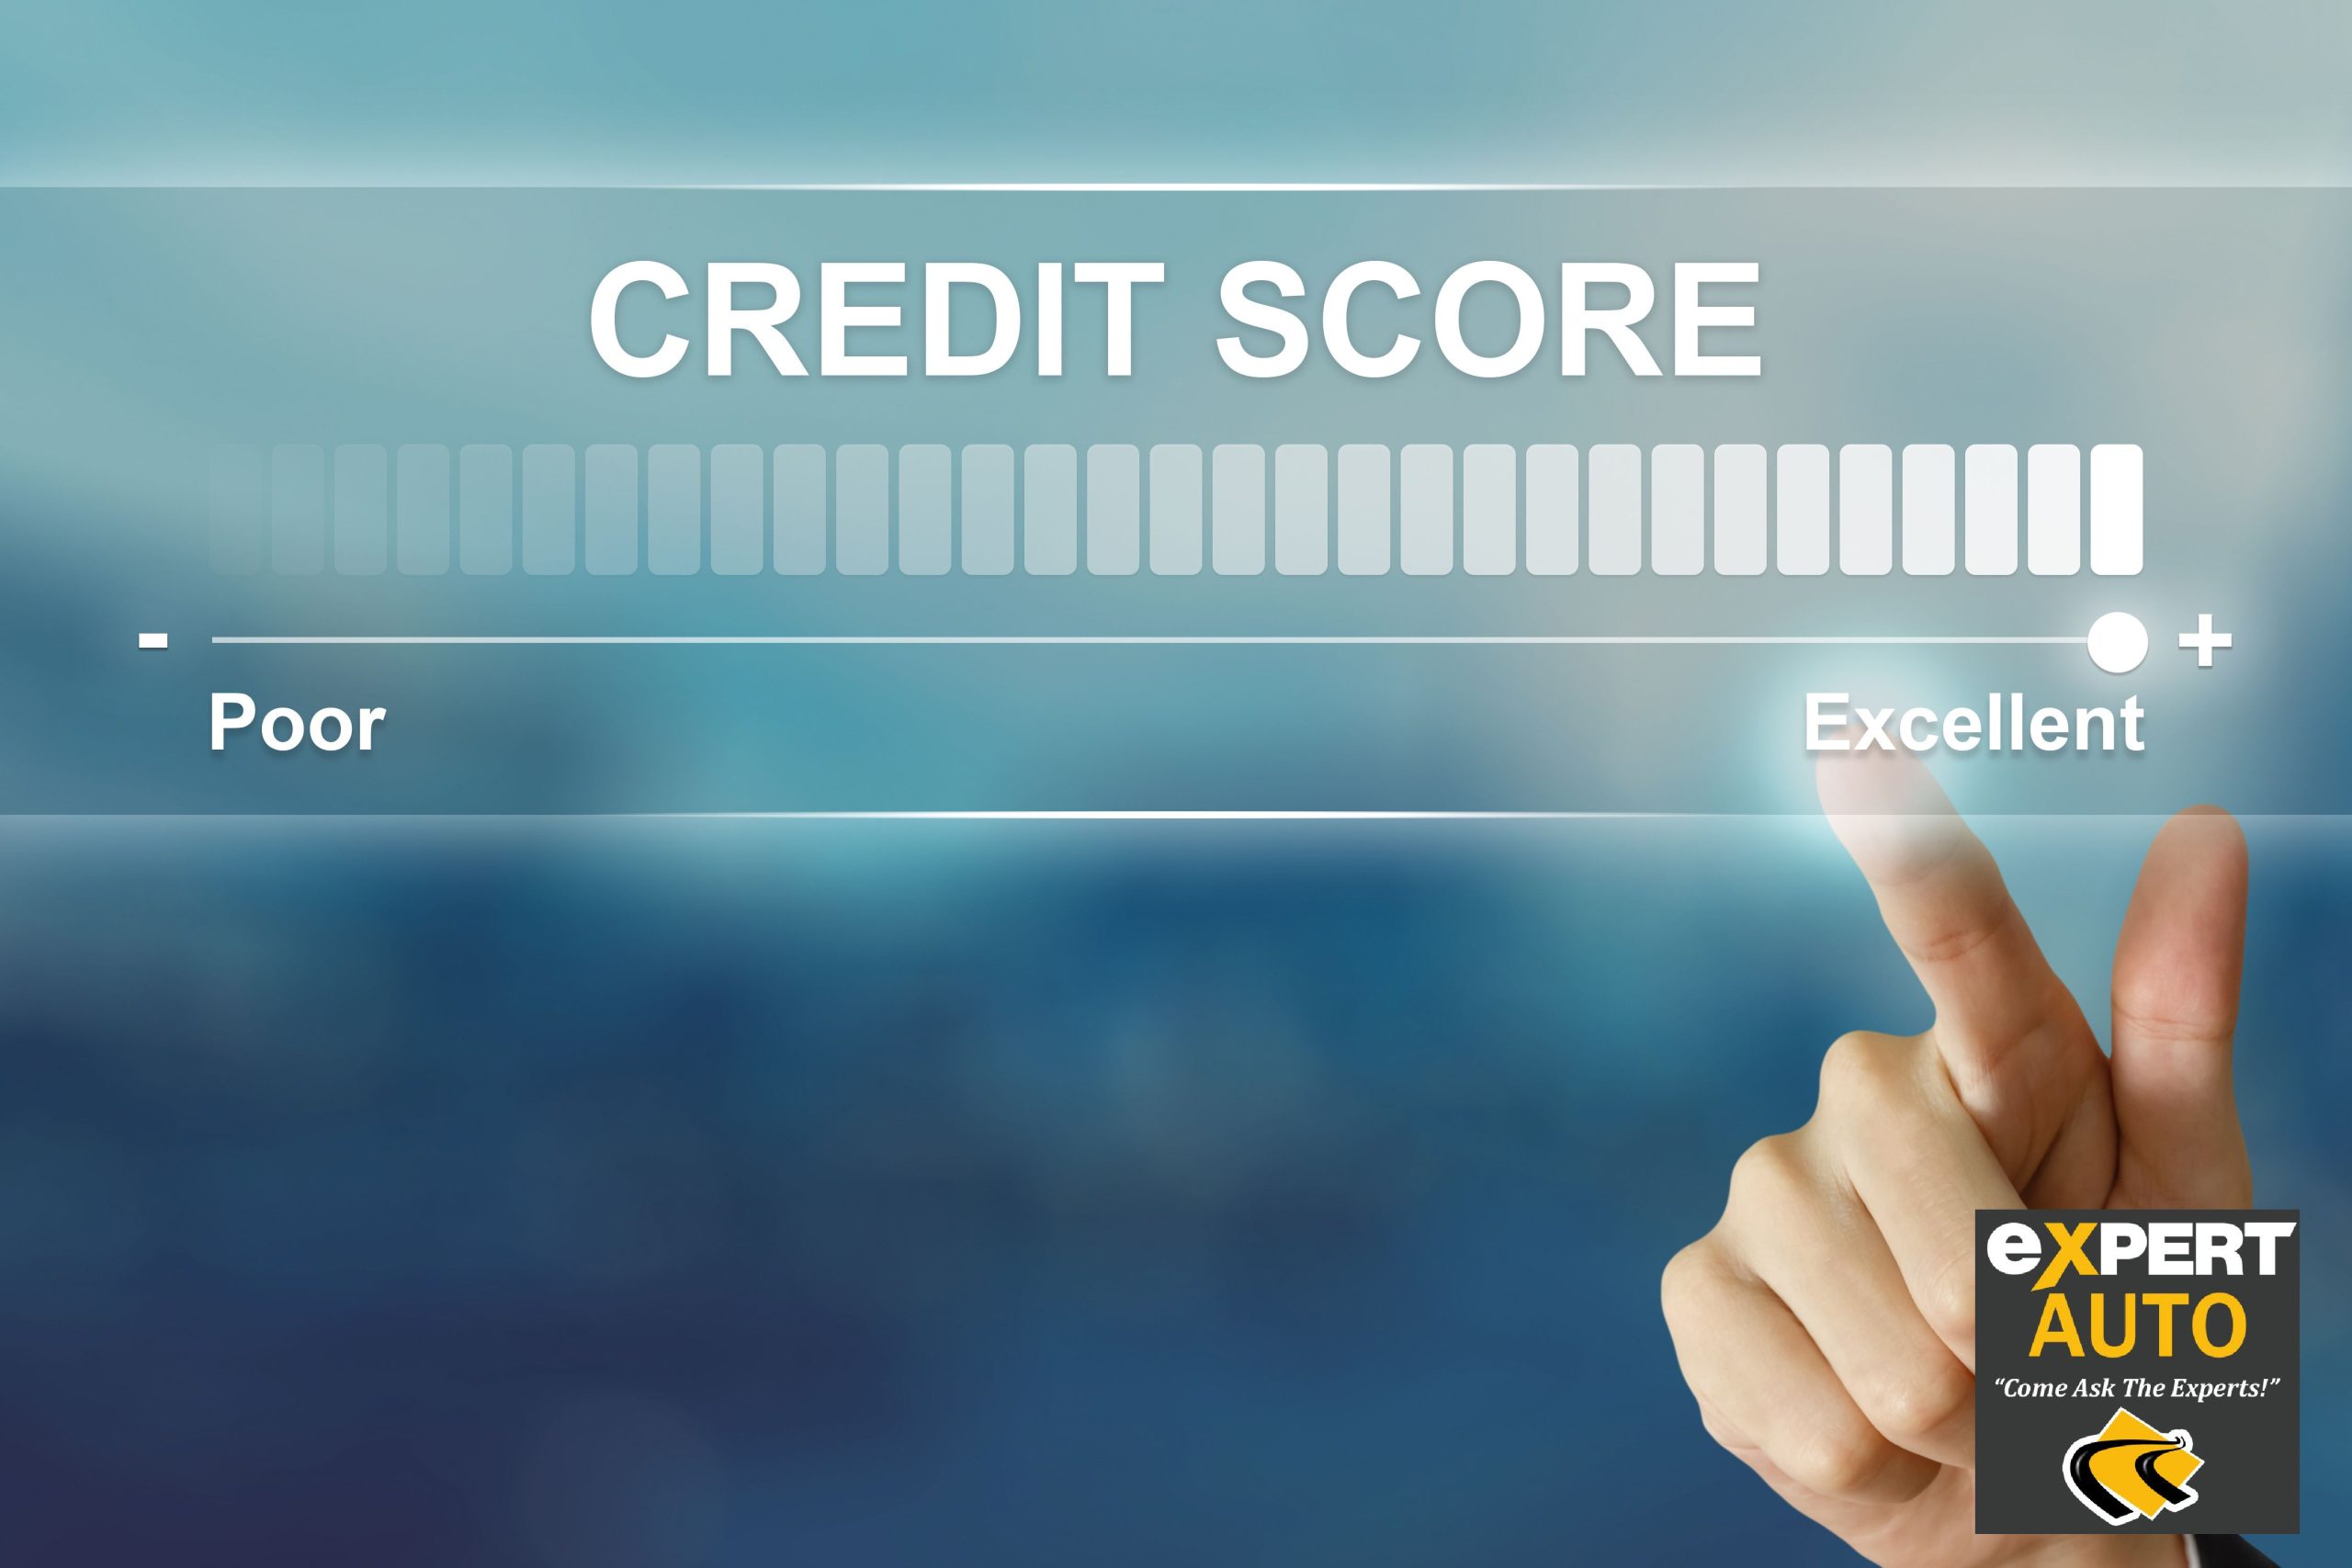 Some Woodmore Car Buyers Can Let Their Good Credit Do The Work For Them At Expert Auto